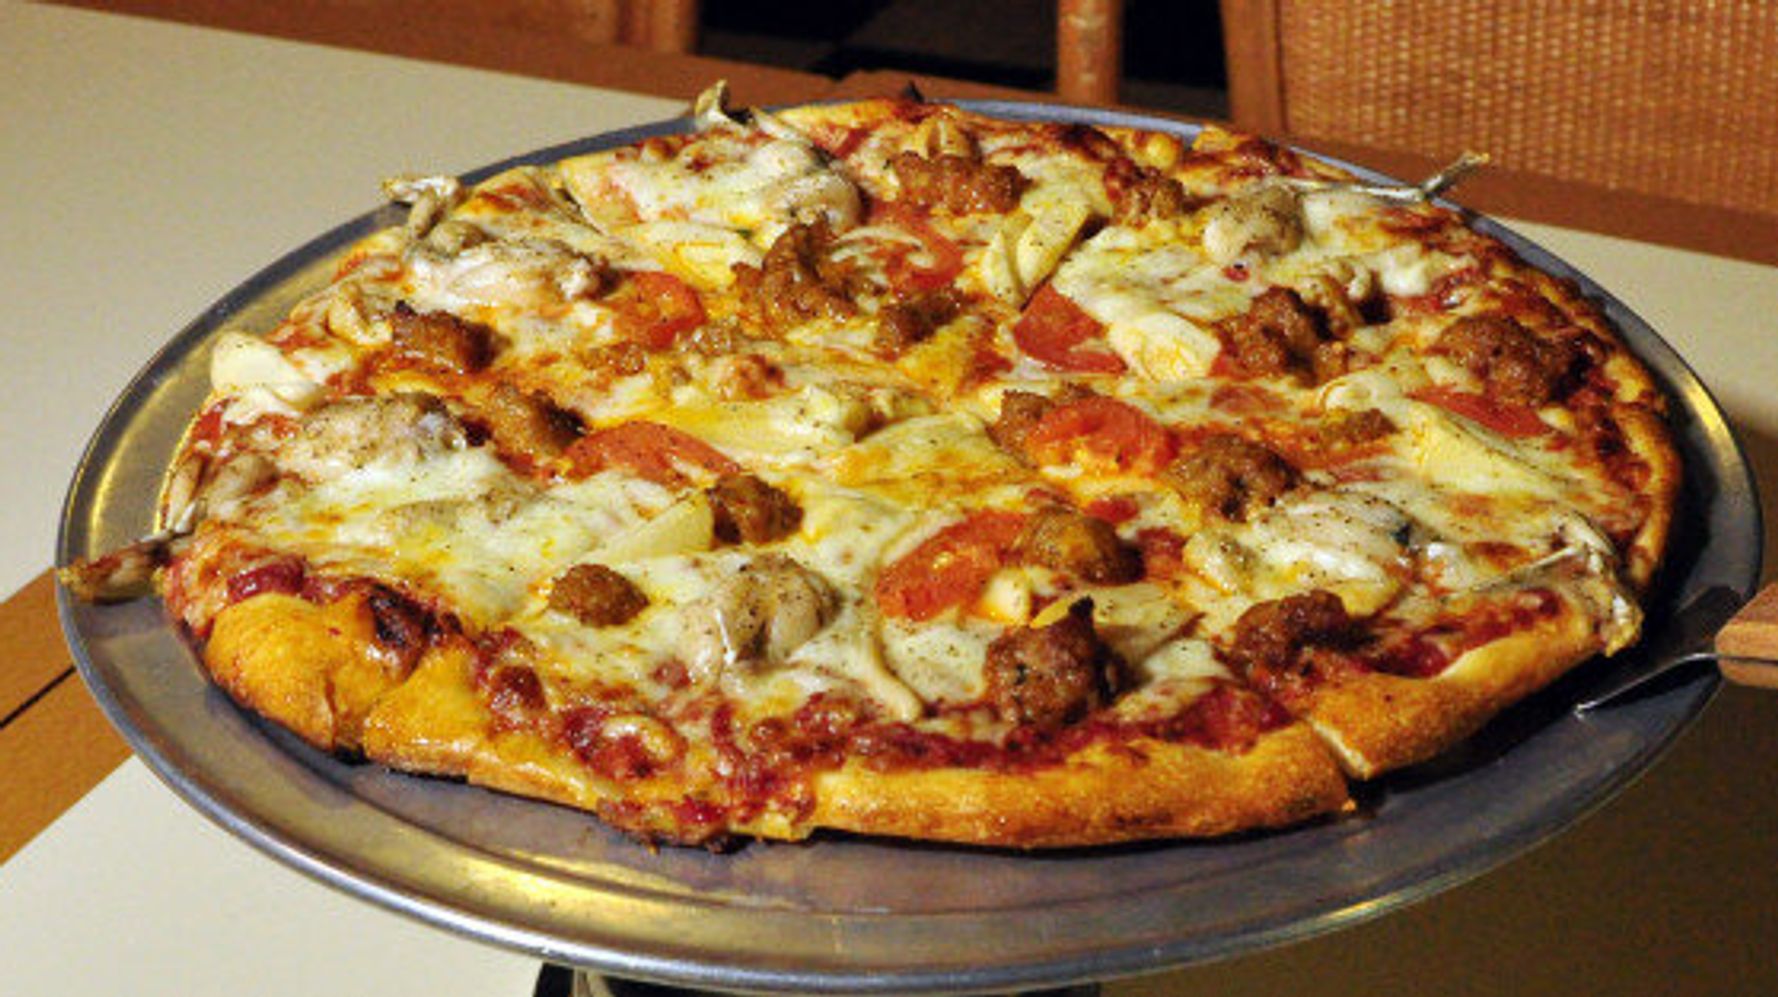 Python Pizza: Florida Pizzeria Offers Snake Meat On Menu | HuffPost Life